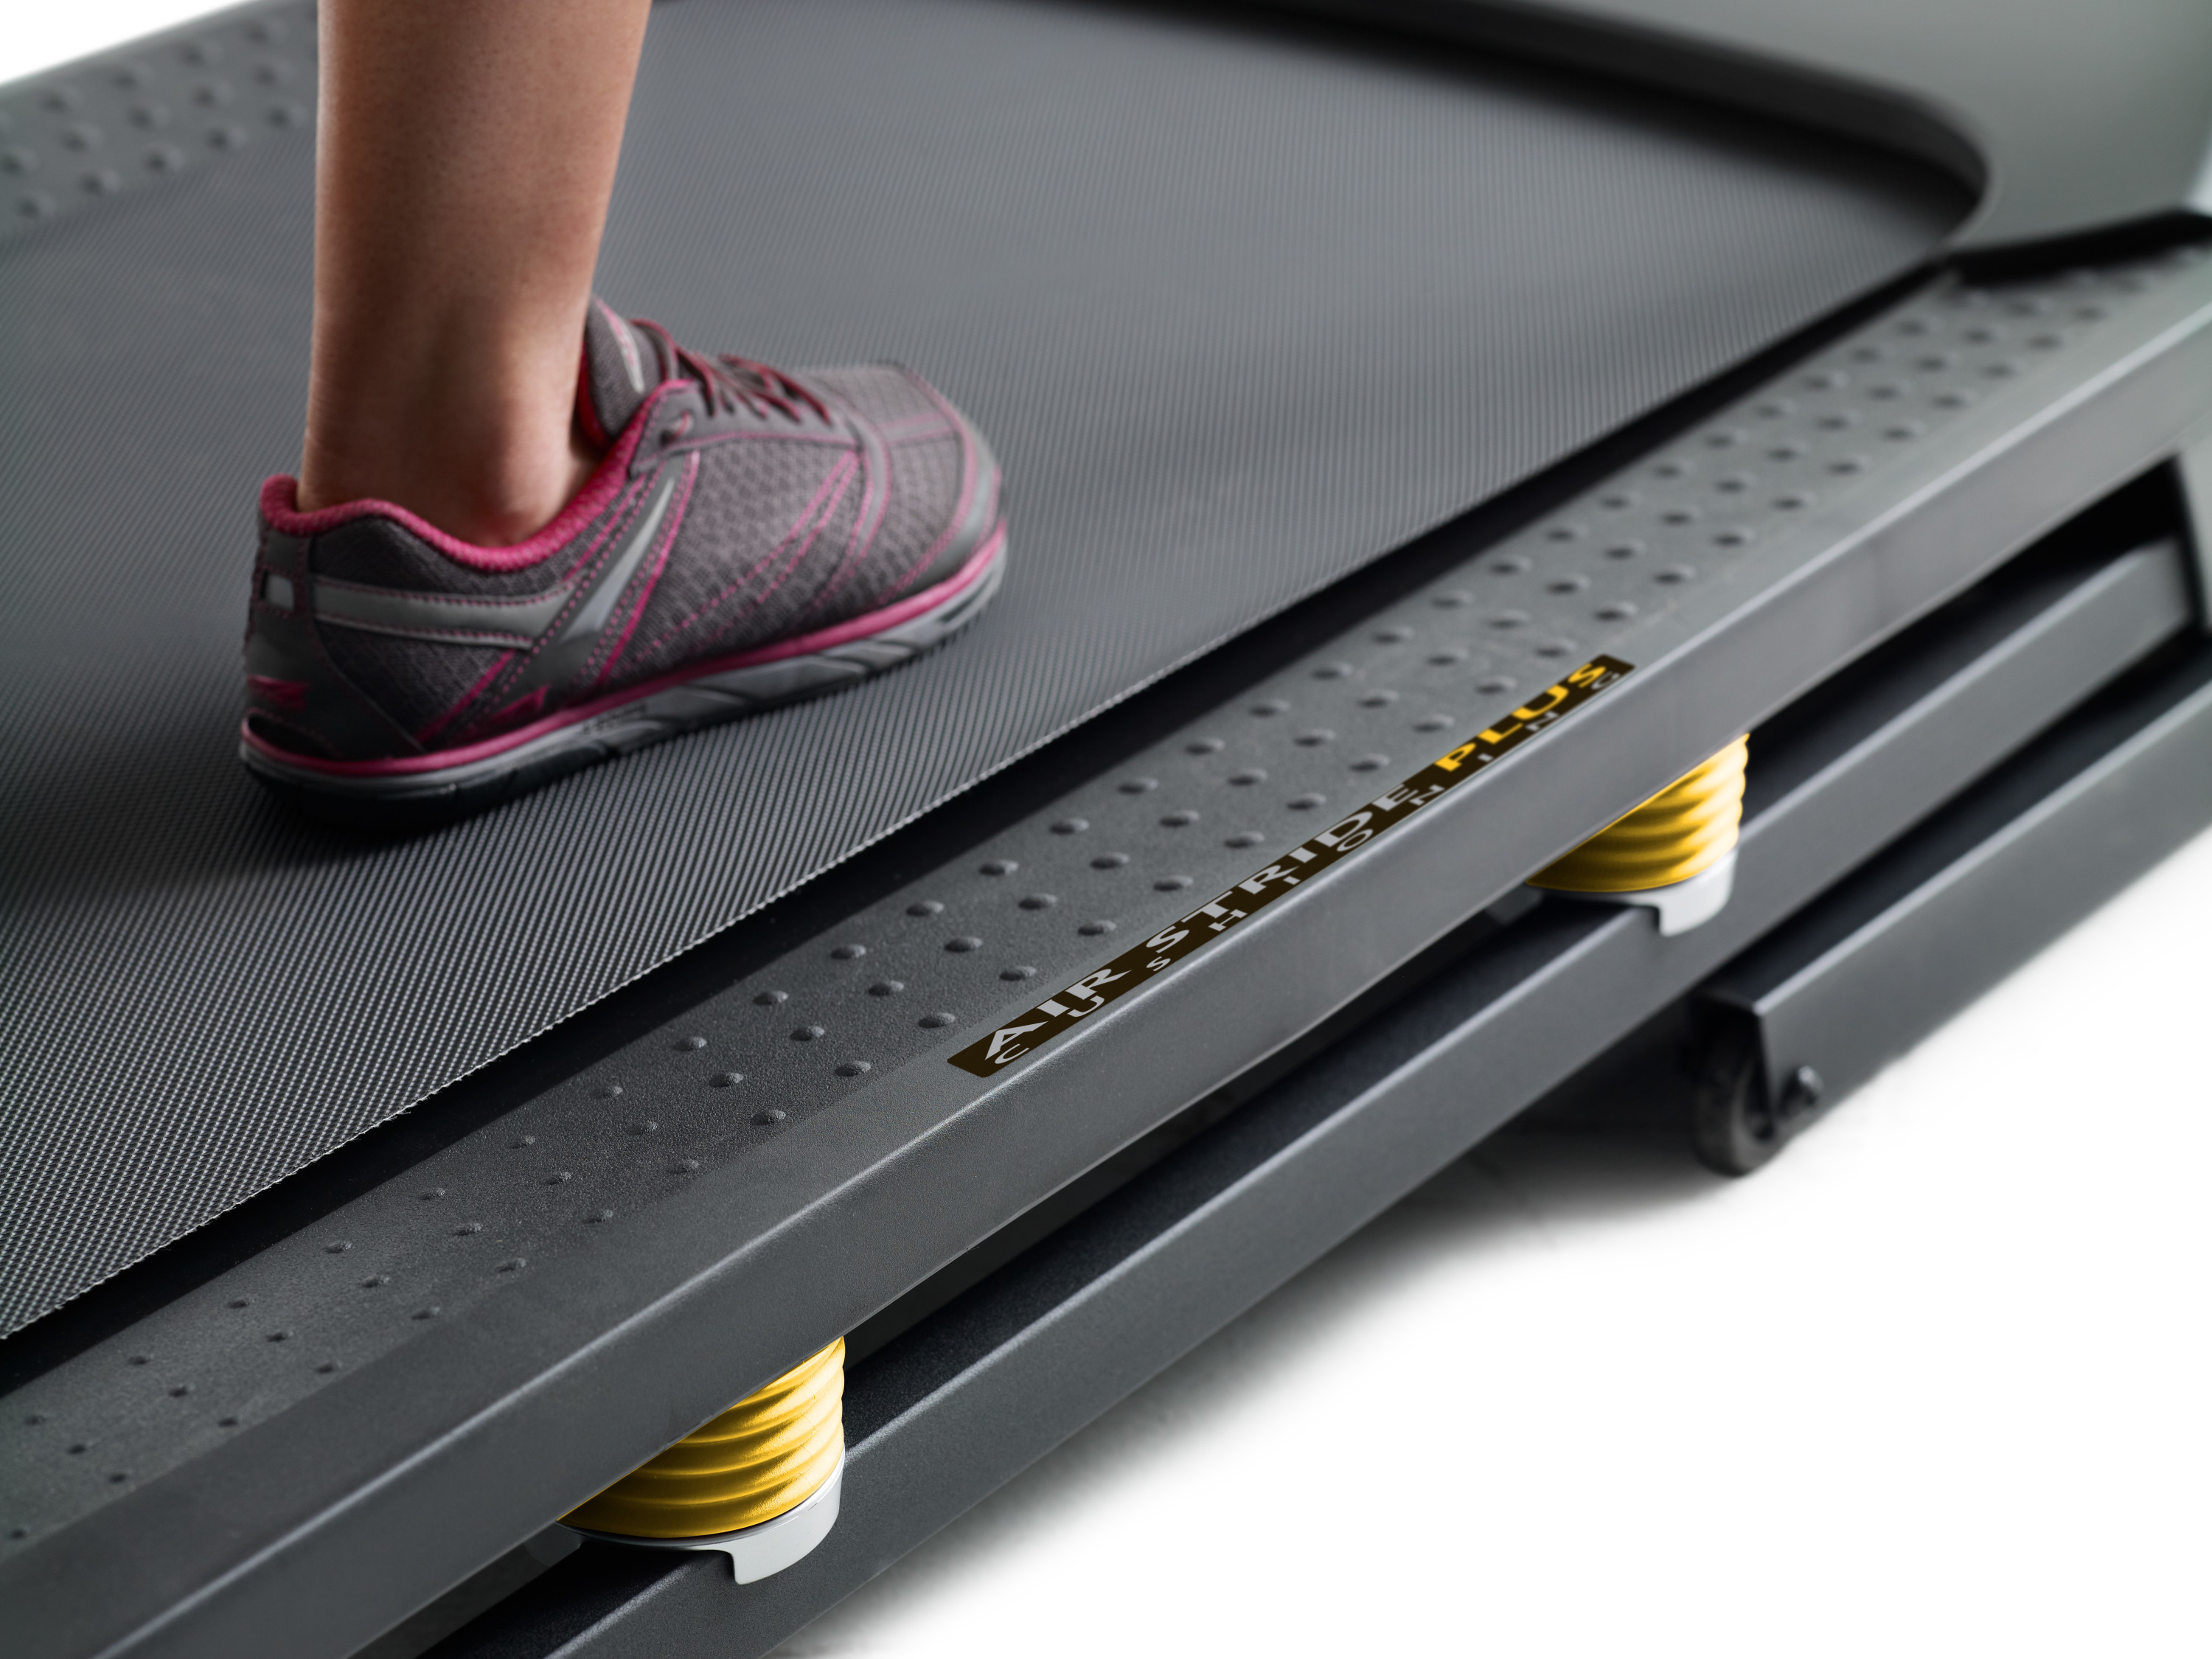 ProForm Trainer 720 Folding Treadmill with 10% Incline Training and 10 MPH Speed Controls - image 3 of 5